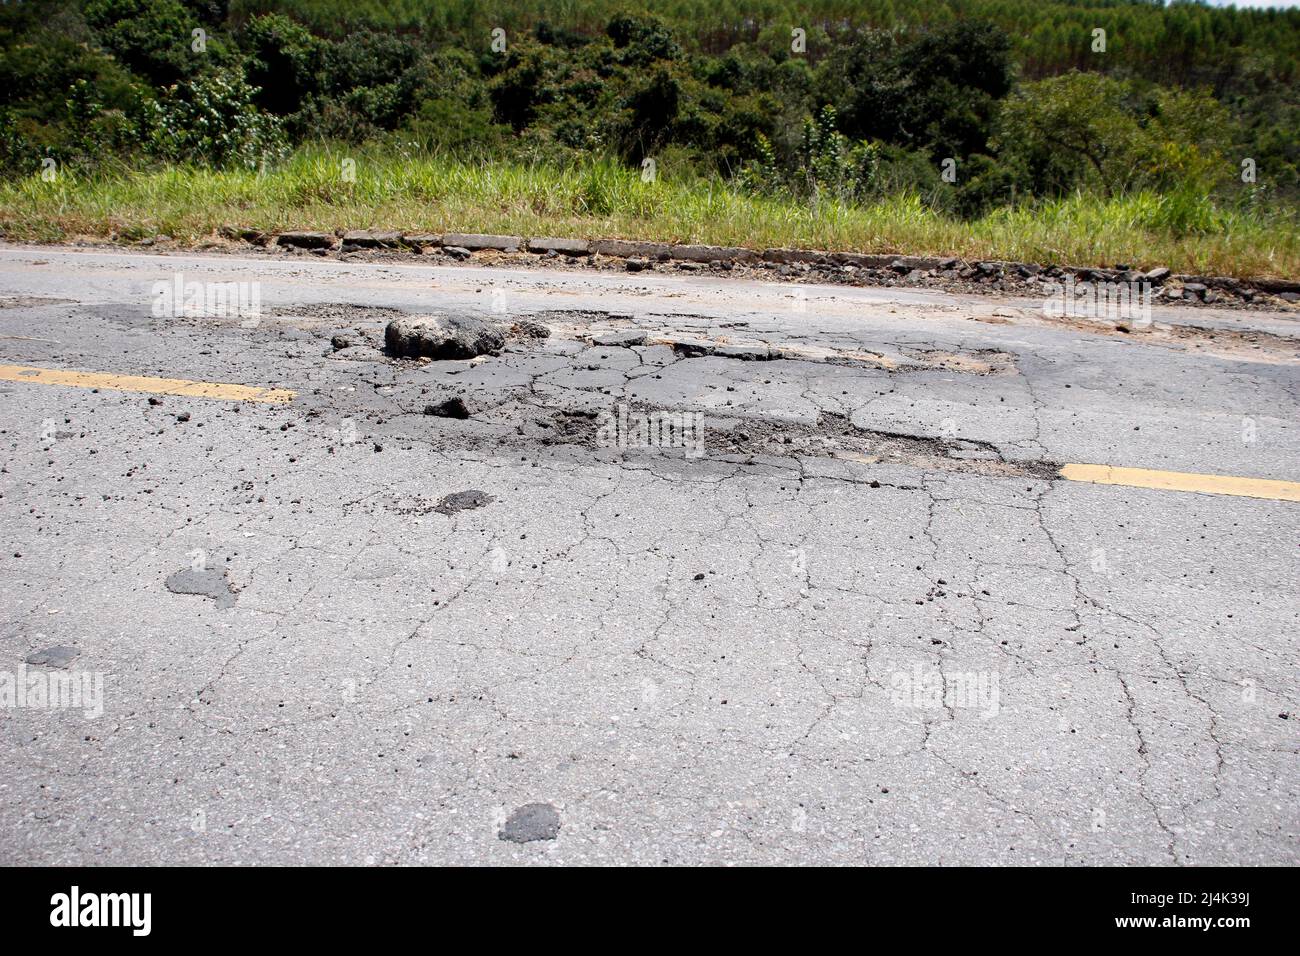 highway roof with defective and spoiled asphalt, dangerous for traffic Stock Photo